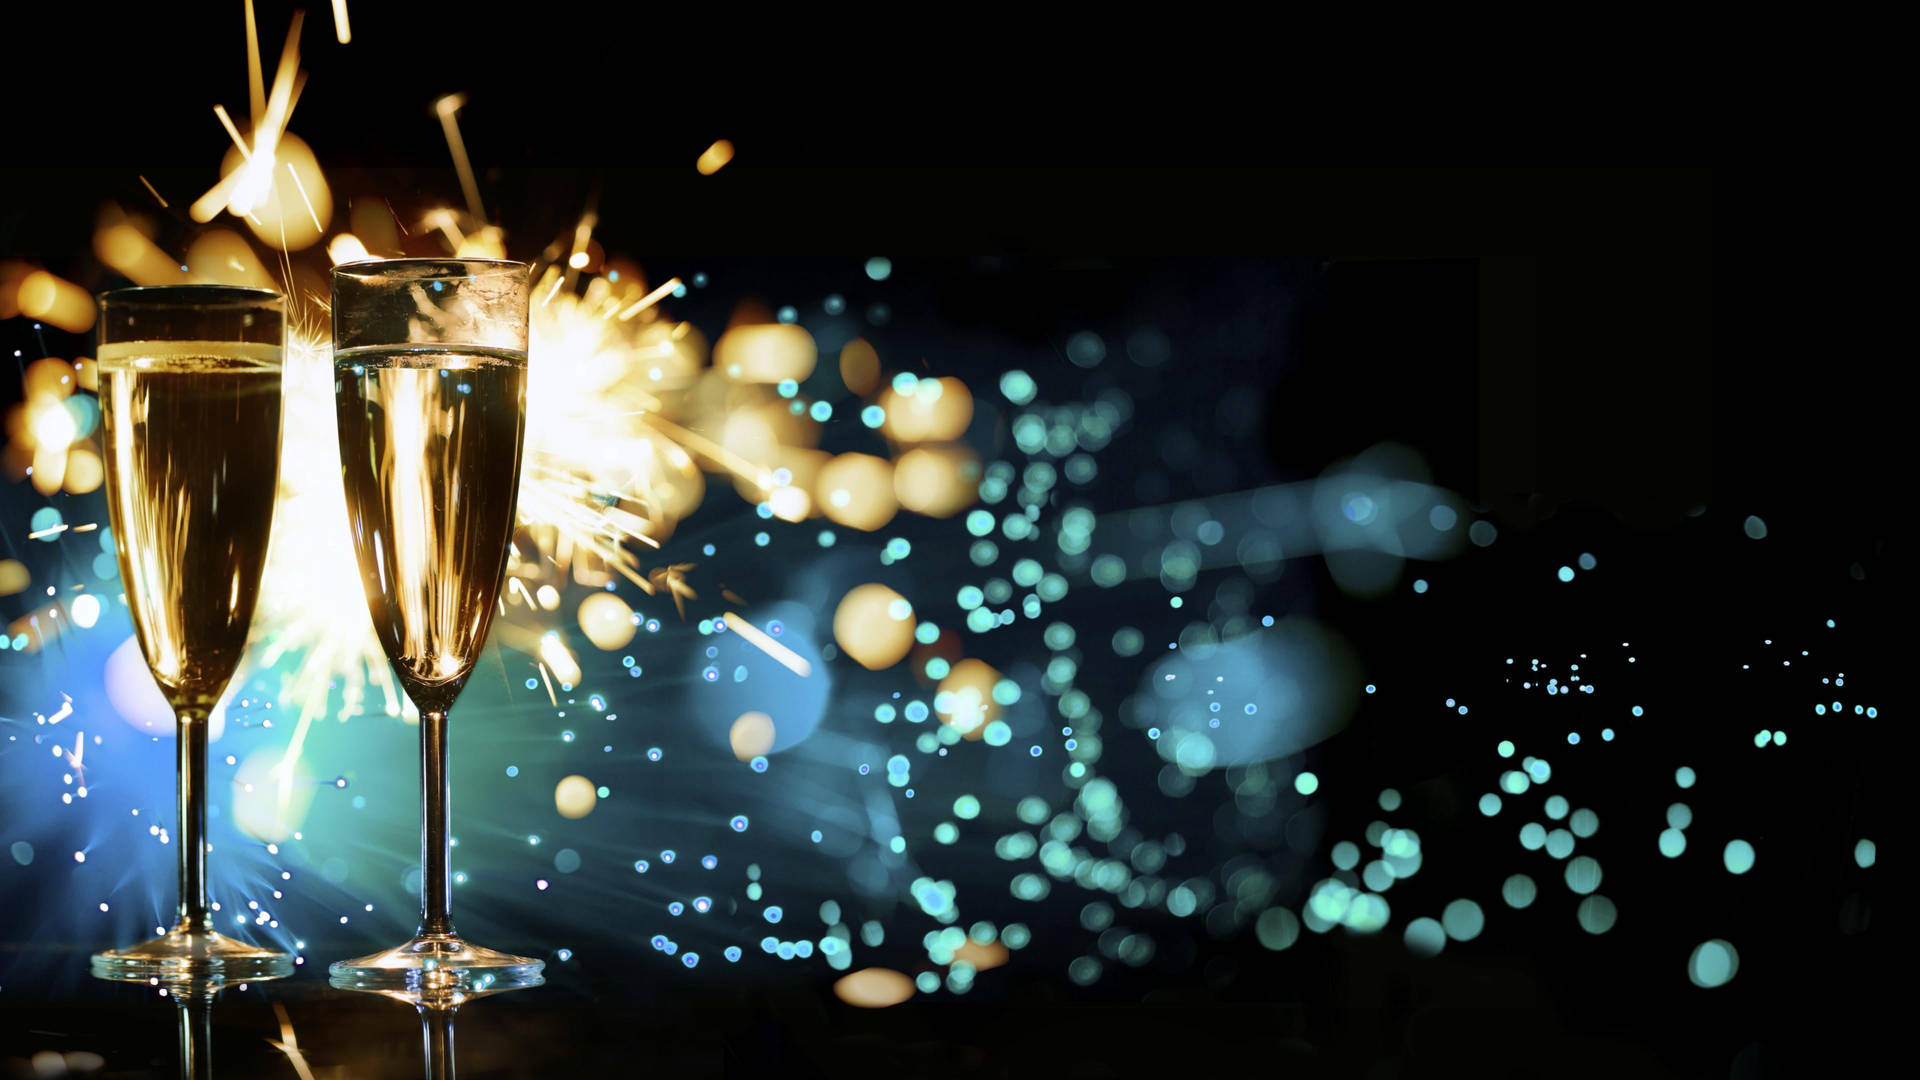 A Jubilant Celebration: New Year's Champagne And Fireworks Wallpaper